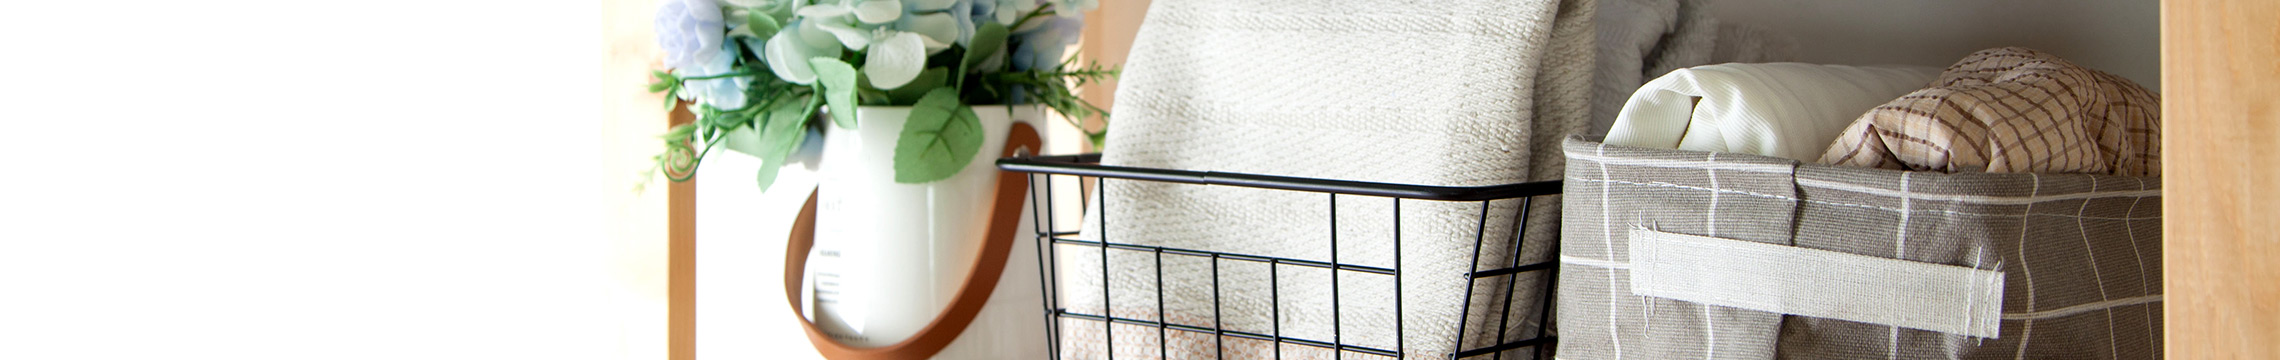 Linens folded and set into wire storage baskets on a wooden bookshelf